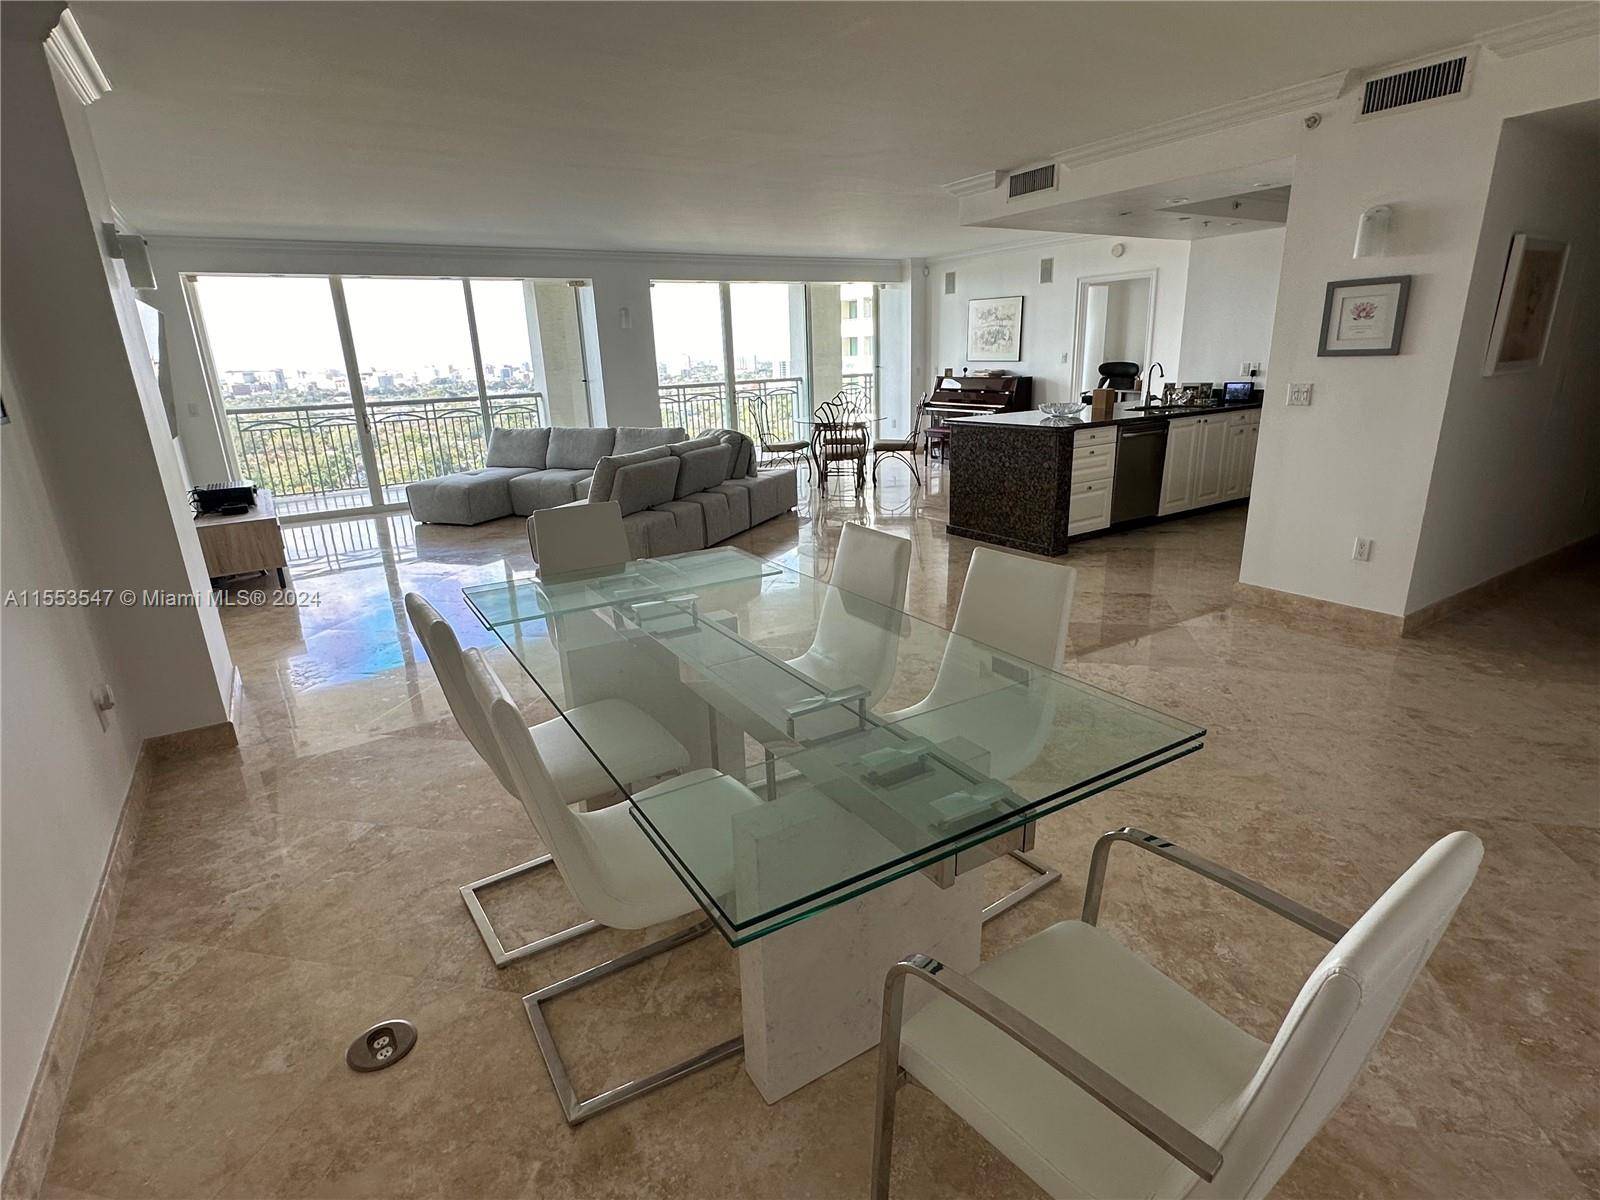 This prestigious 18th floor unit in the luxurious Ritz Carlson Residences in Coconut Grove is now available for rent.